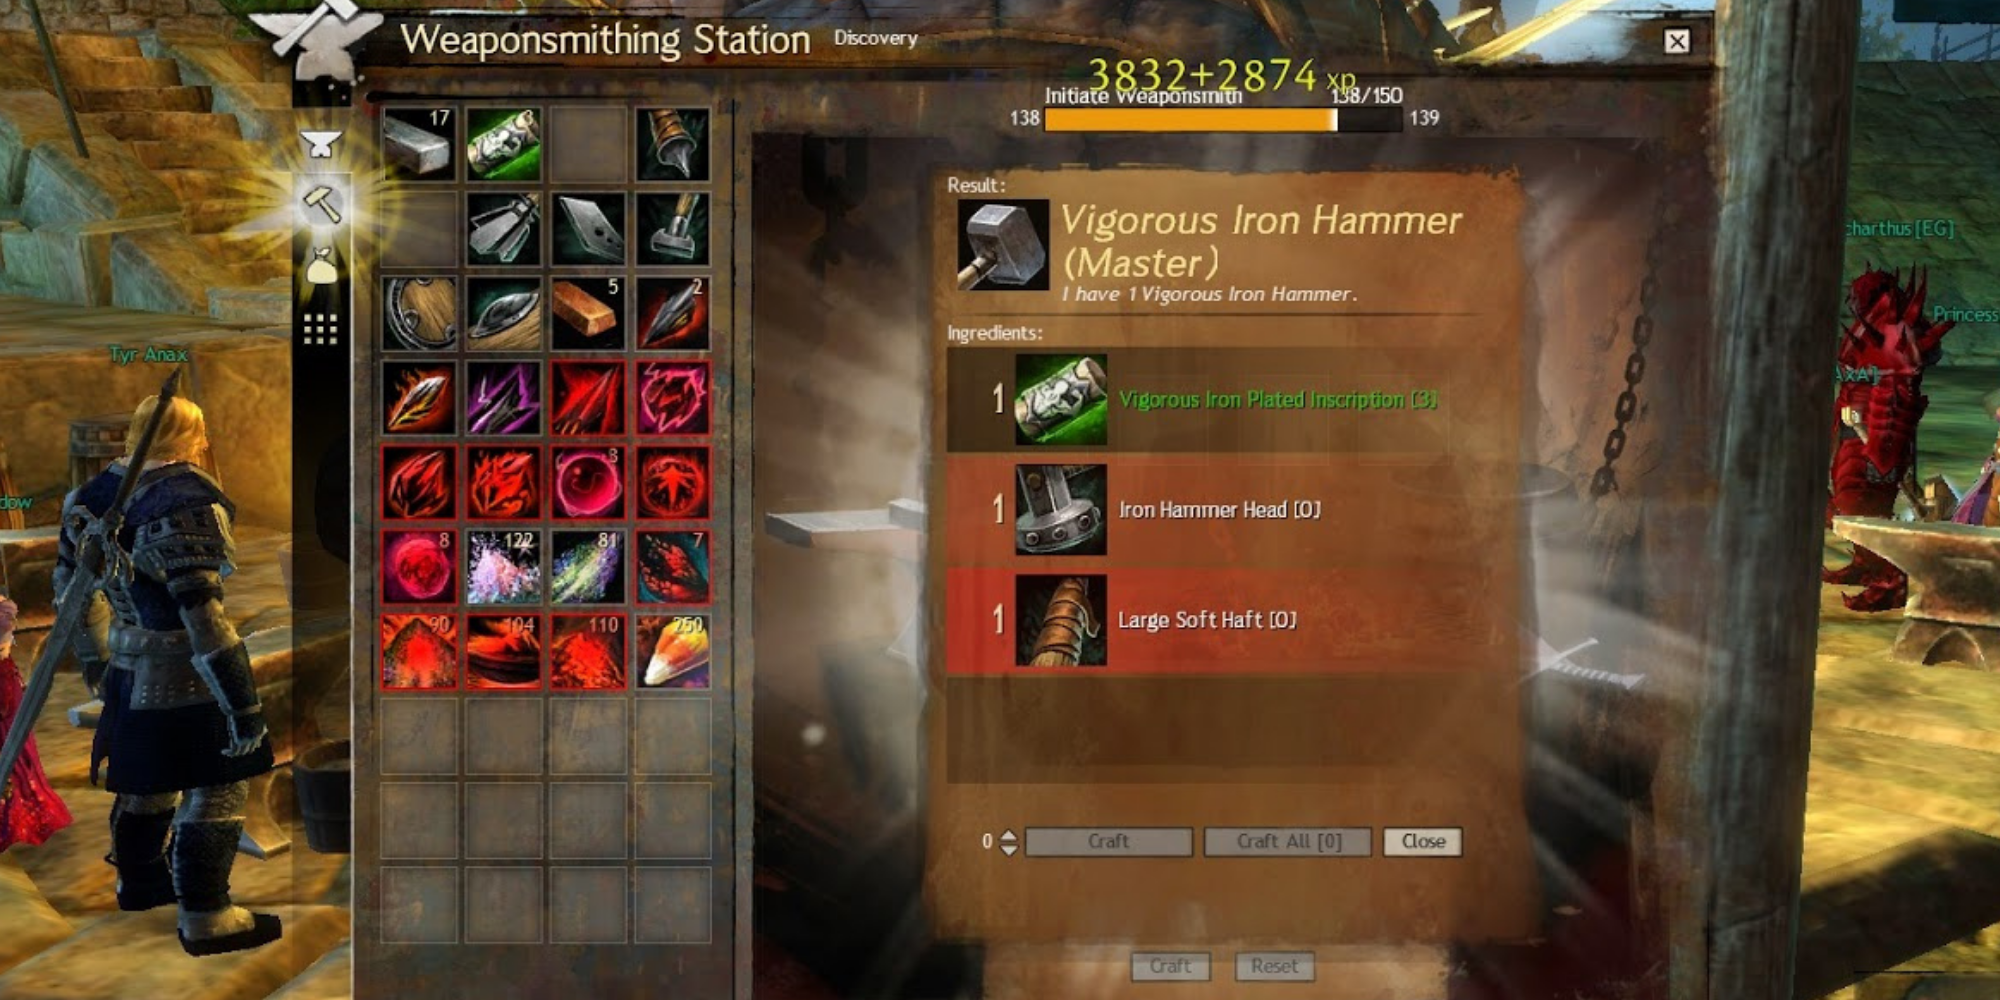 GW2 - screenshot of earning experience in weaponsmith crafting